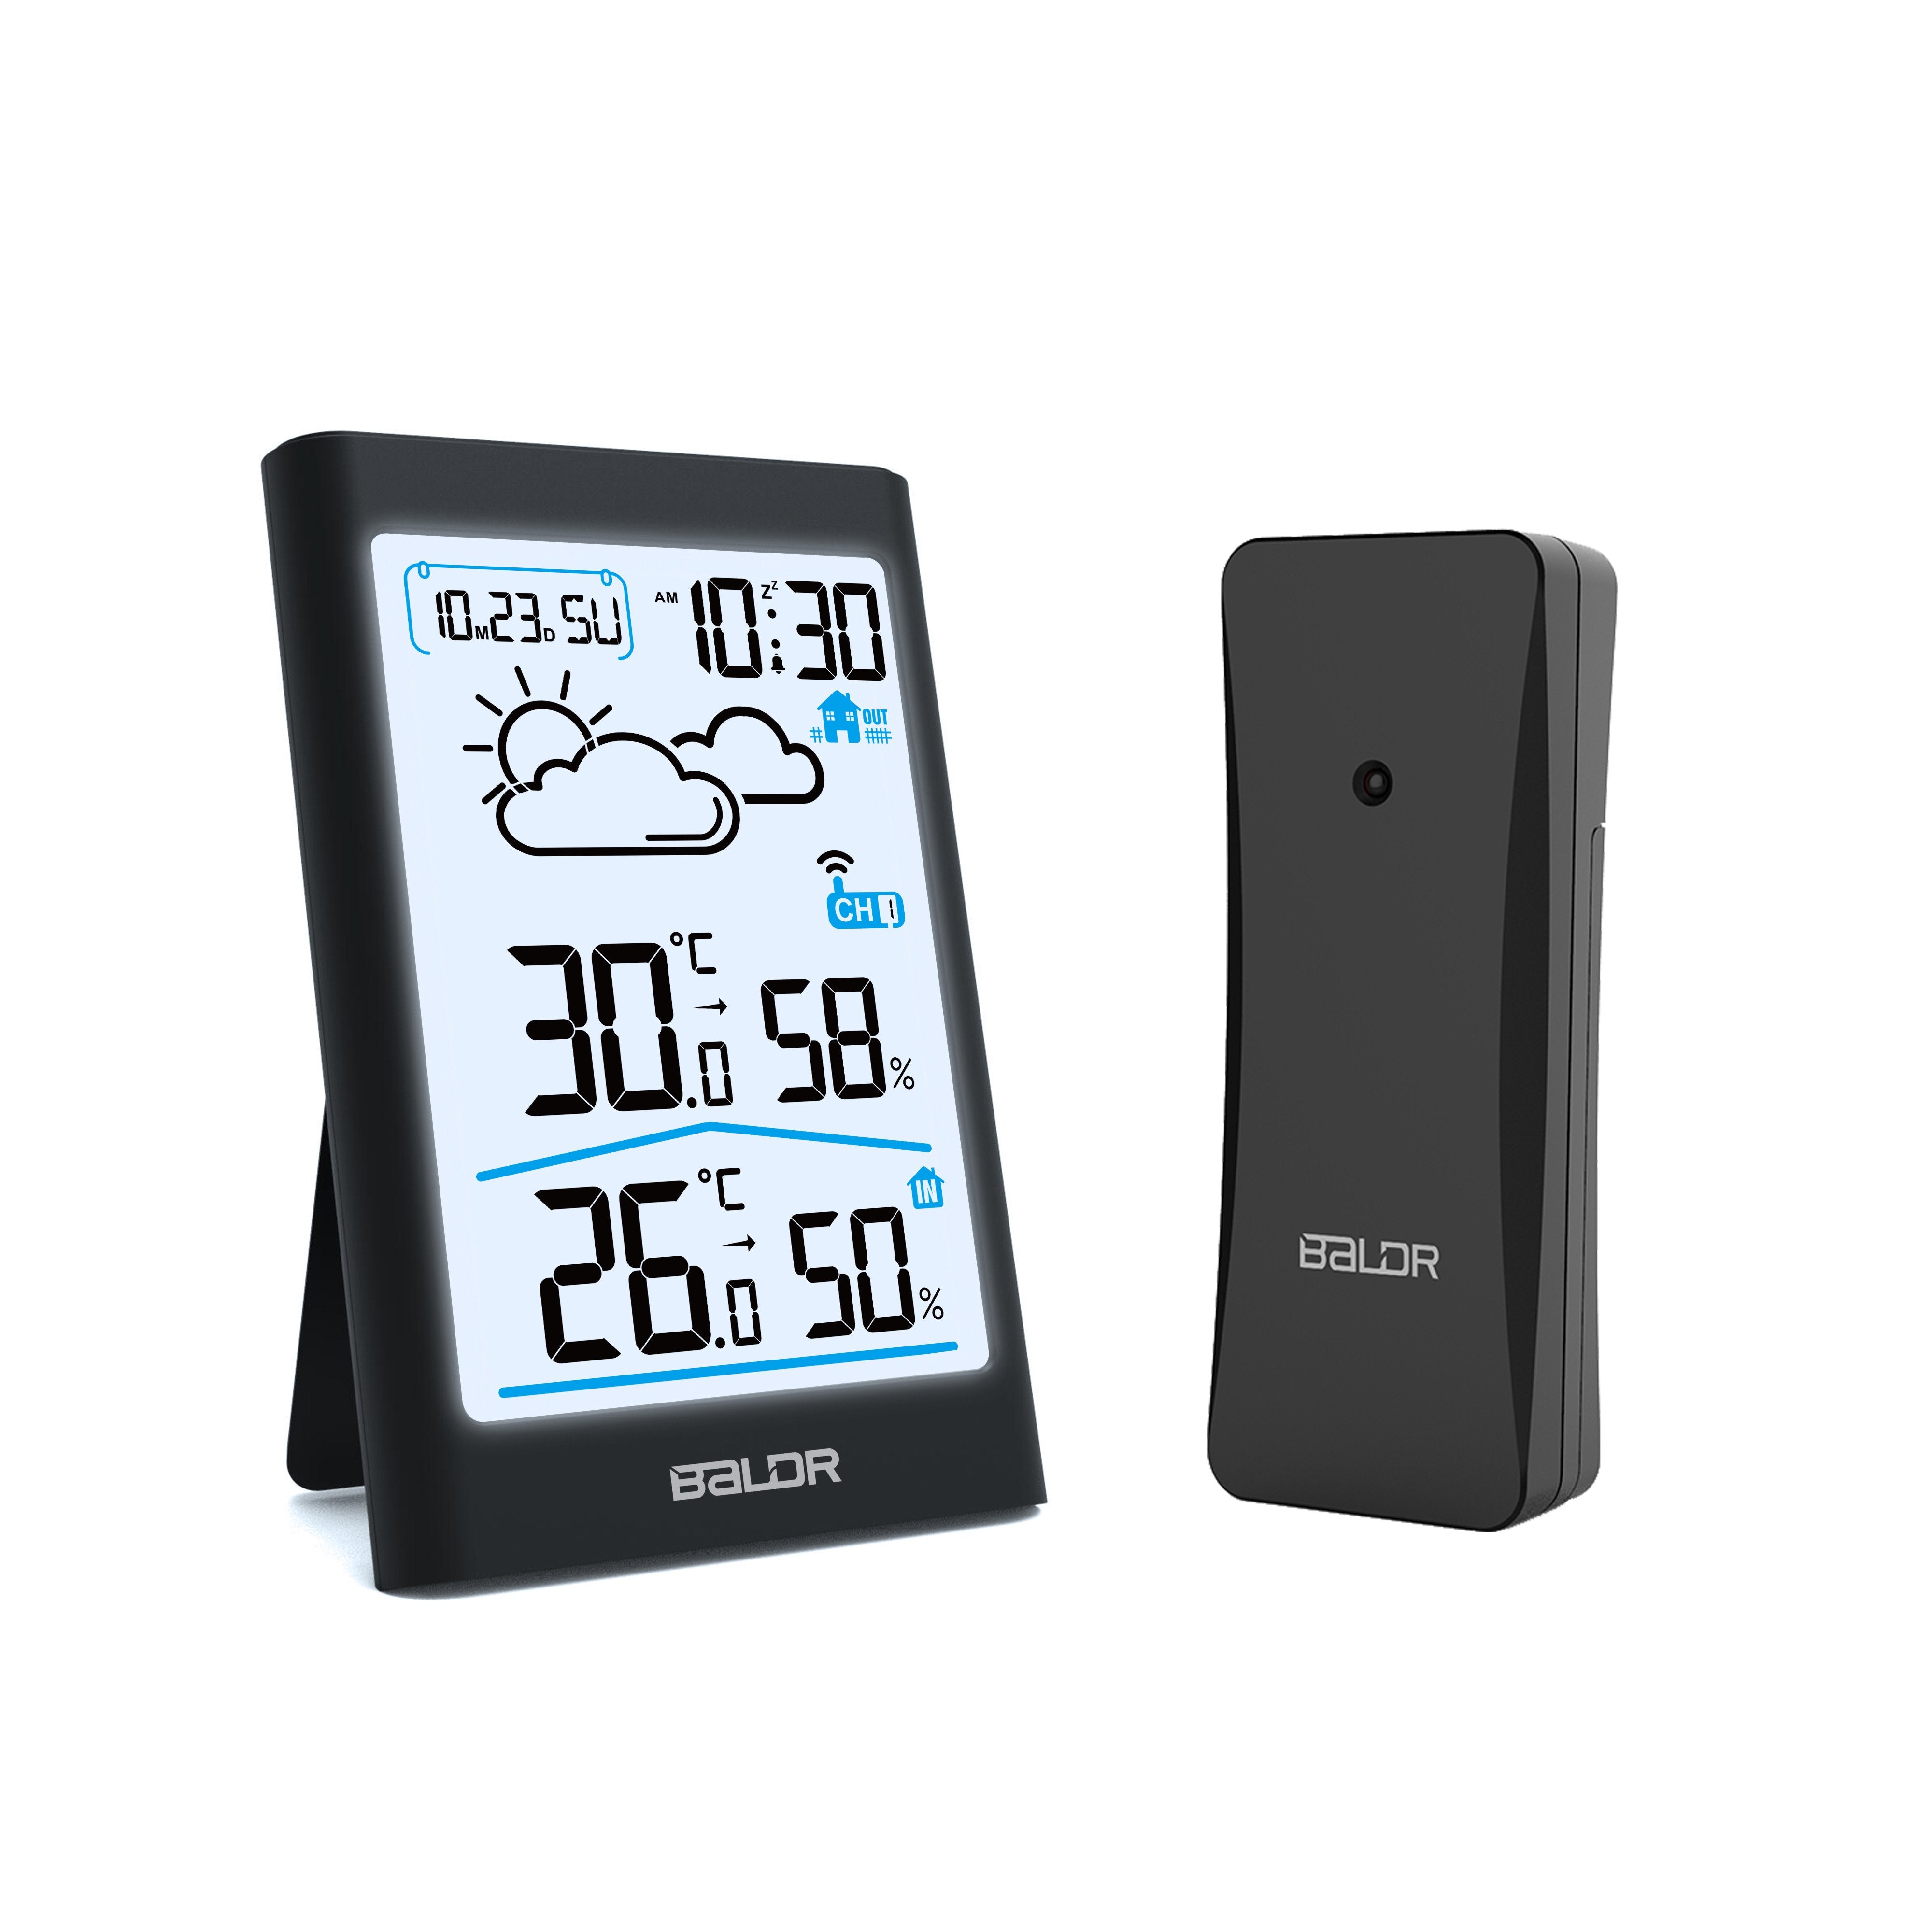 BALDR WS0341 Indoor & Outdoor Thermometer Hygrometer w/ Backlight, Wireless Weather Station, Temperature Monitor & Humidity Gauge, Battery-Operated